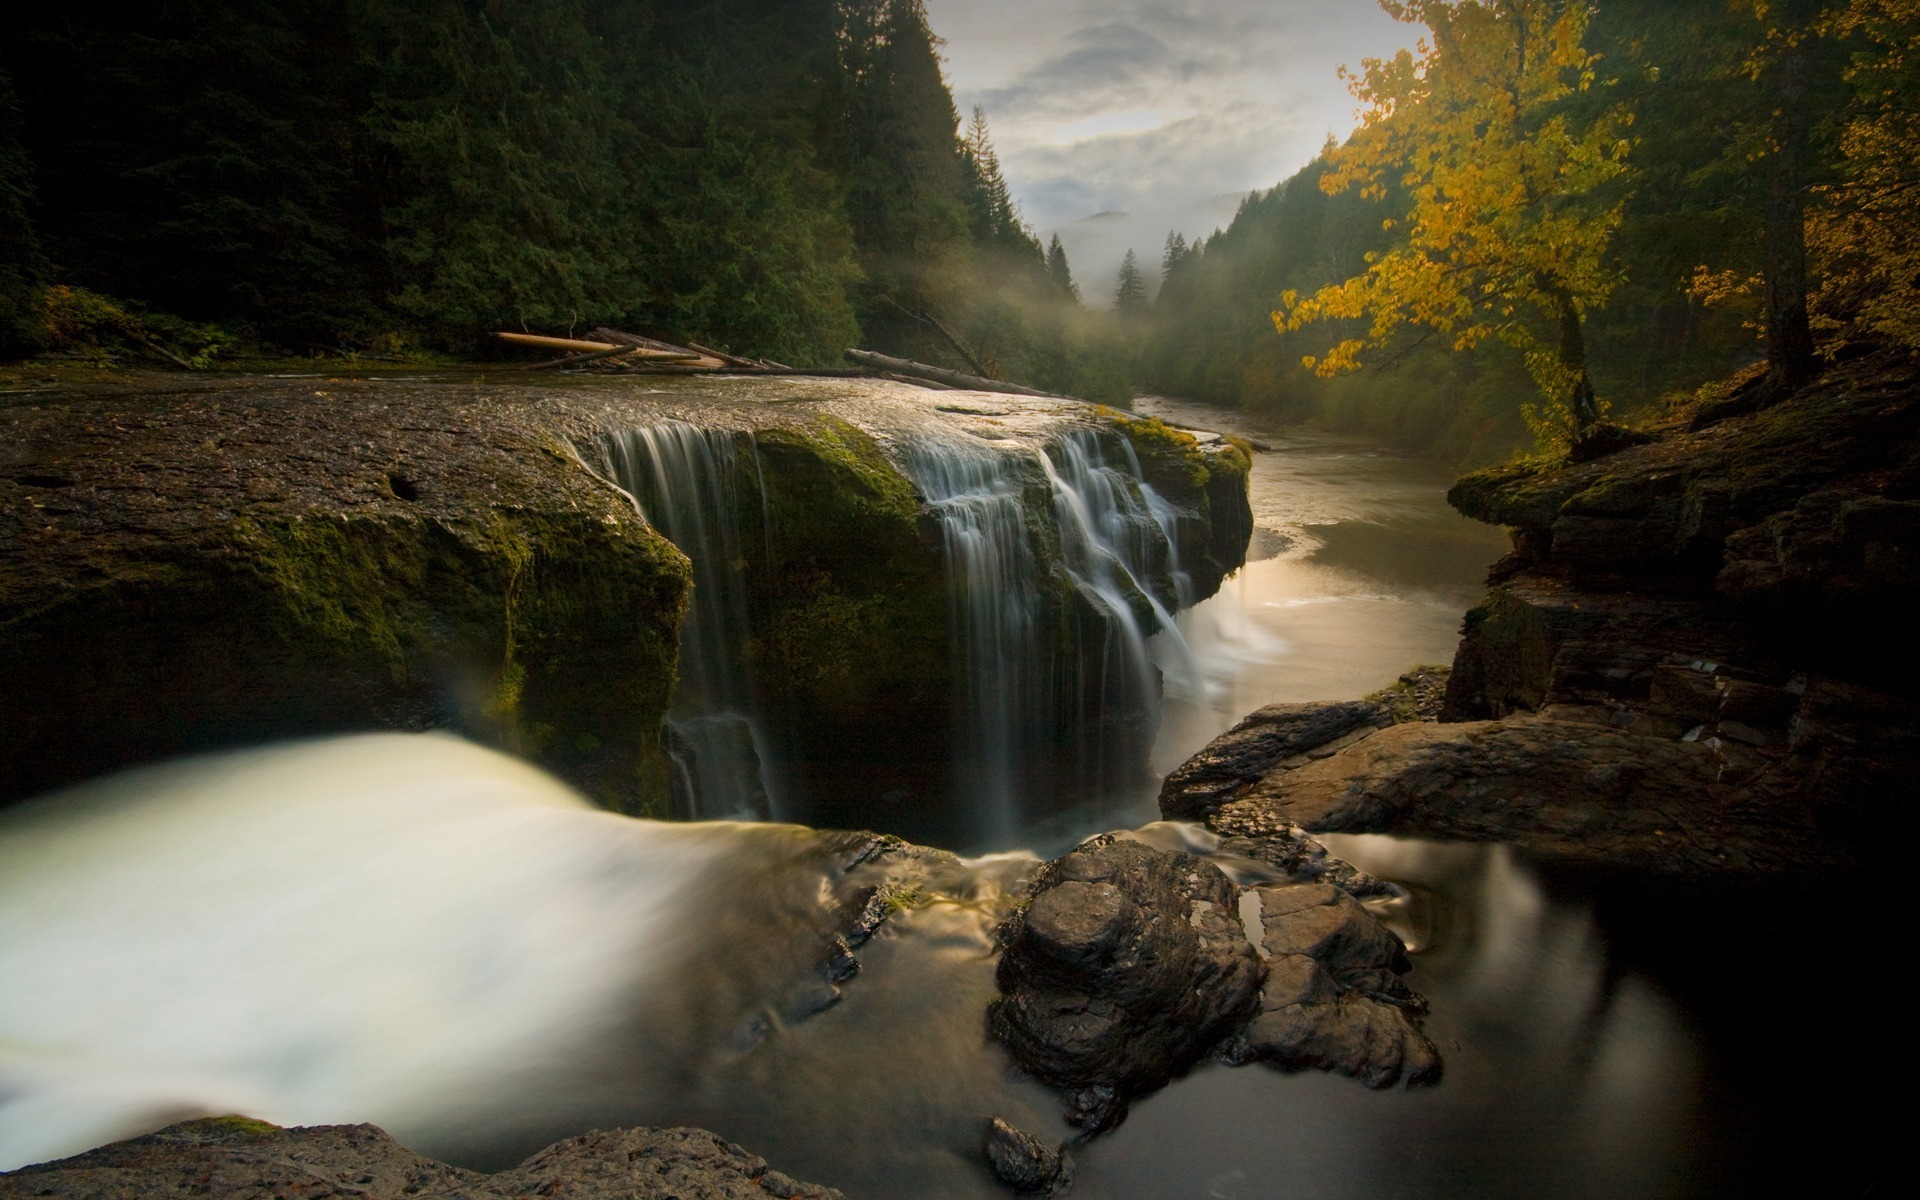  wallpaper Sun sets over Lower Lewis River Falls in Washington State